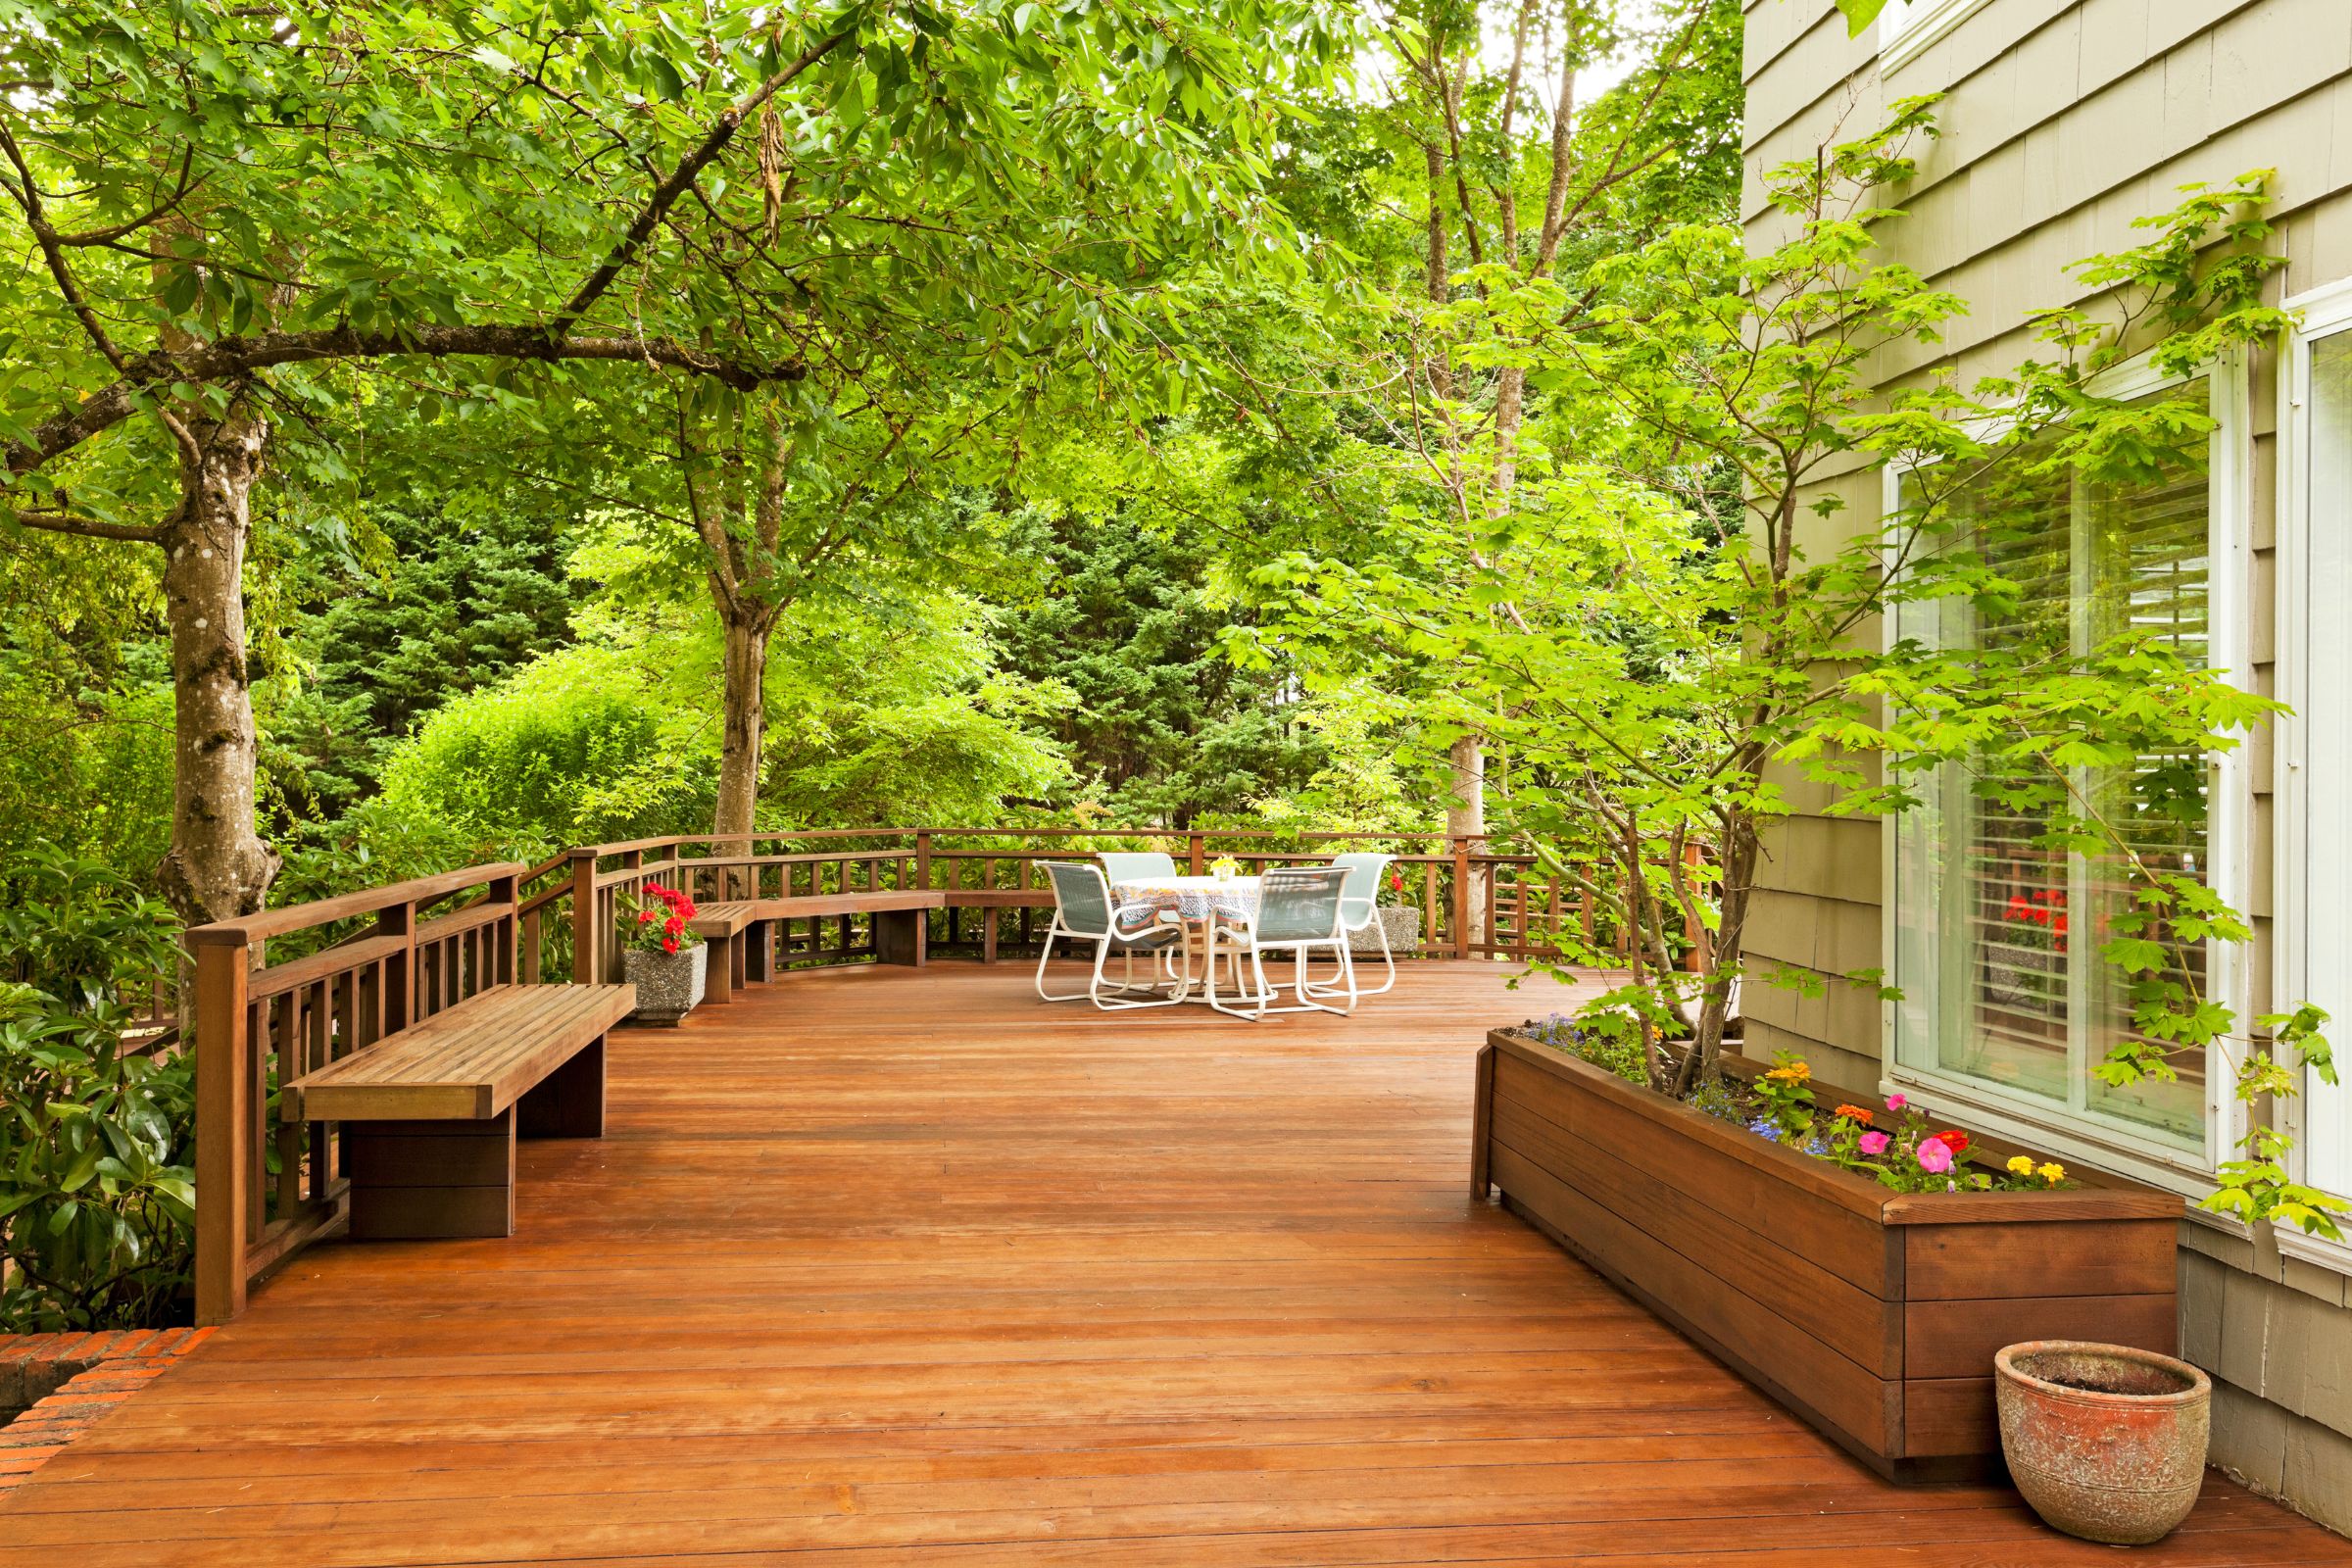 Essential Maintenance Tips to Keep Your Deck Looking Pristine All Year Round